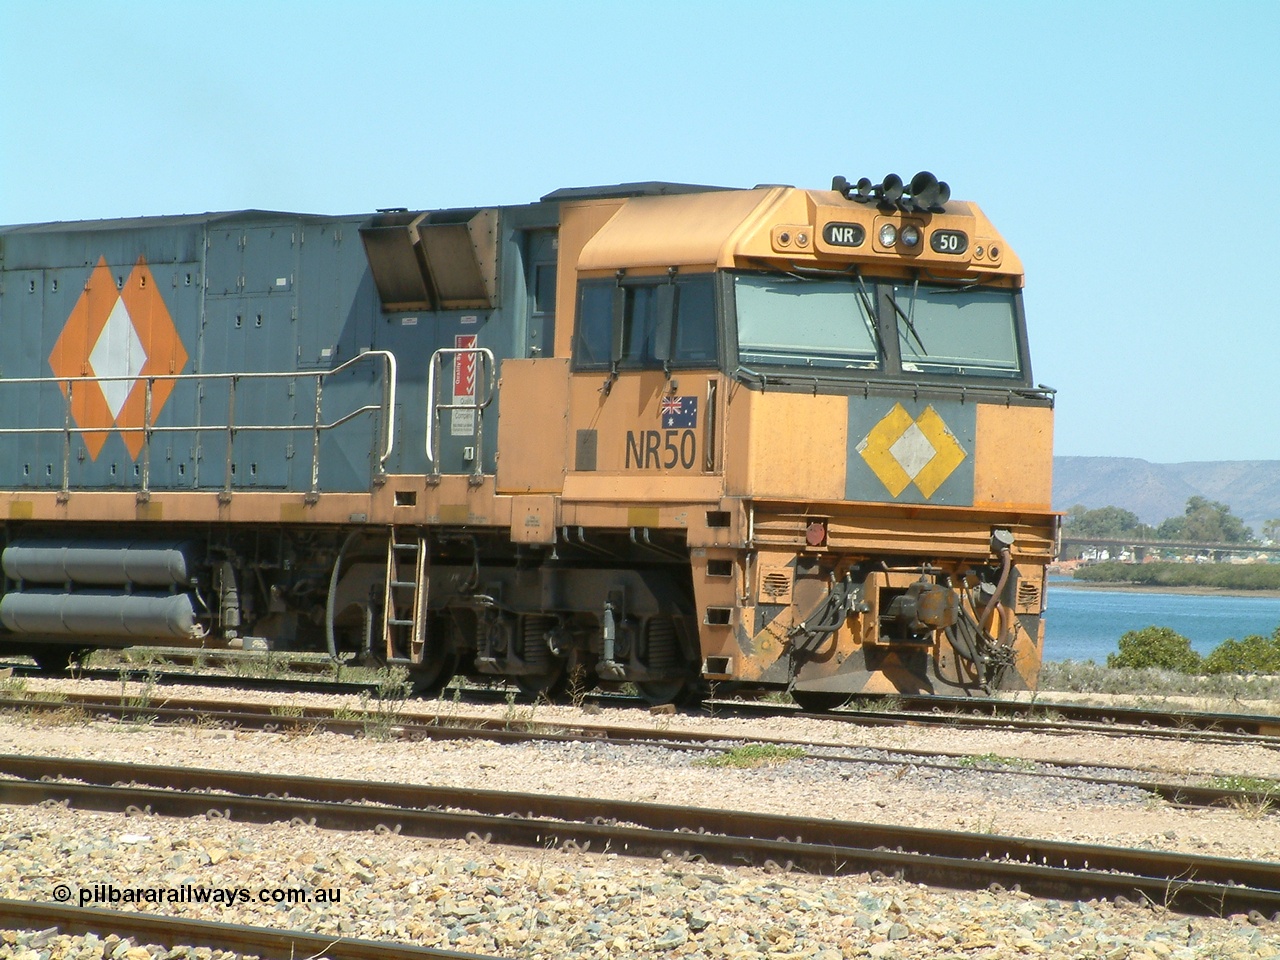 030404 125115
Port Augusta Spencer Junction yard, a Perth bound intermodal awaits departure time on 13 Road behind National Rail NR class units built by Goninan as GE Cv40-9i models, NR 50 serial 7250-08 / 97-252. 4th April 2003.
Keywords: NR-class;NR50;7250-08/97-252;Goninan;GE;Cv40-9i;